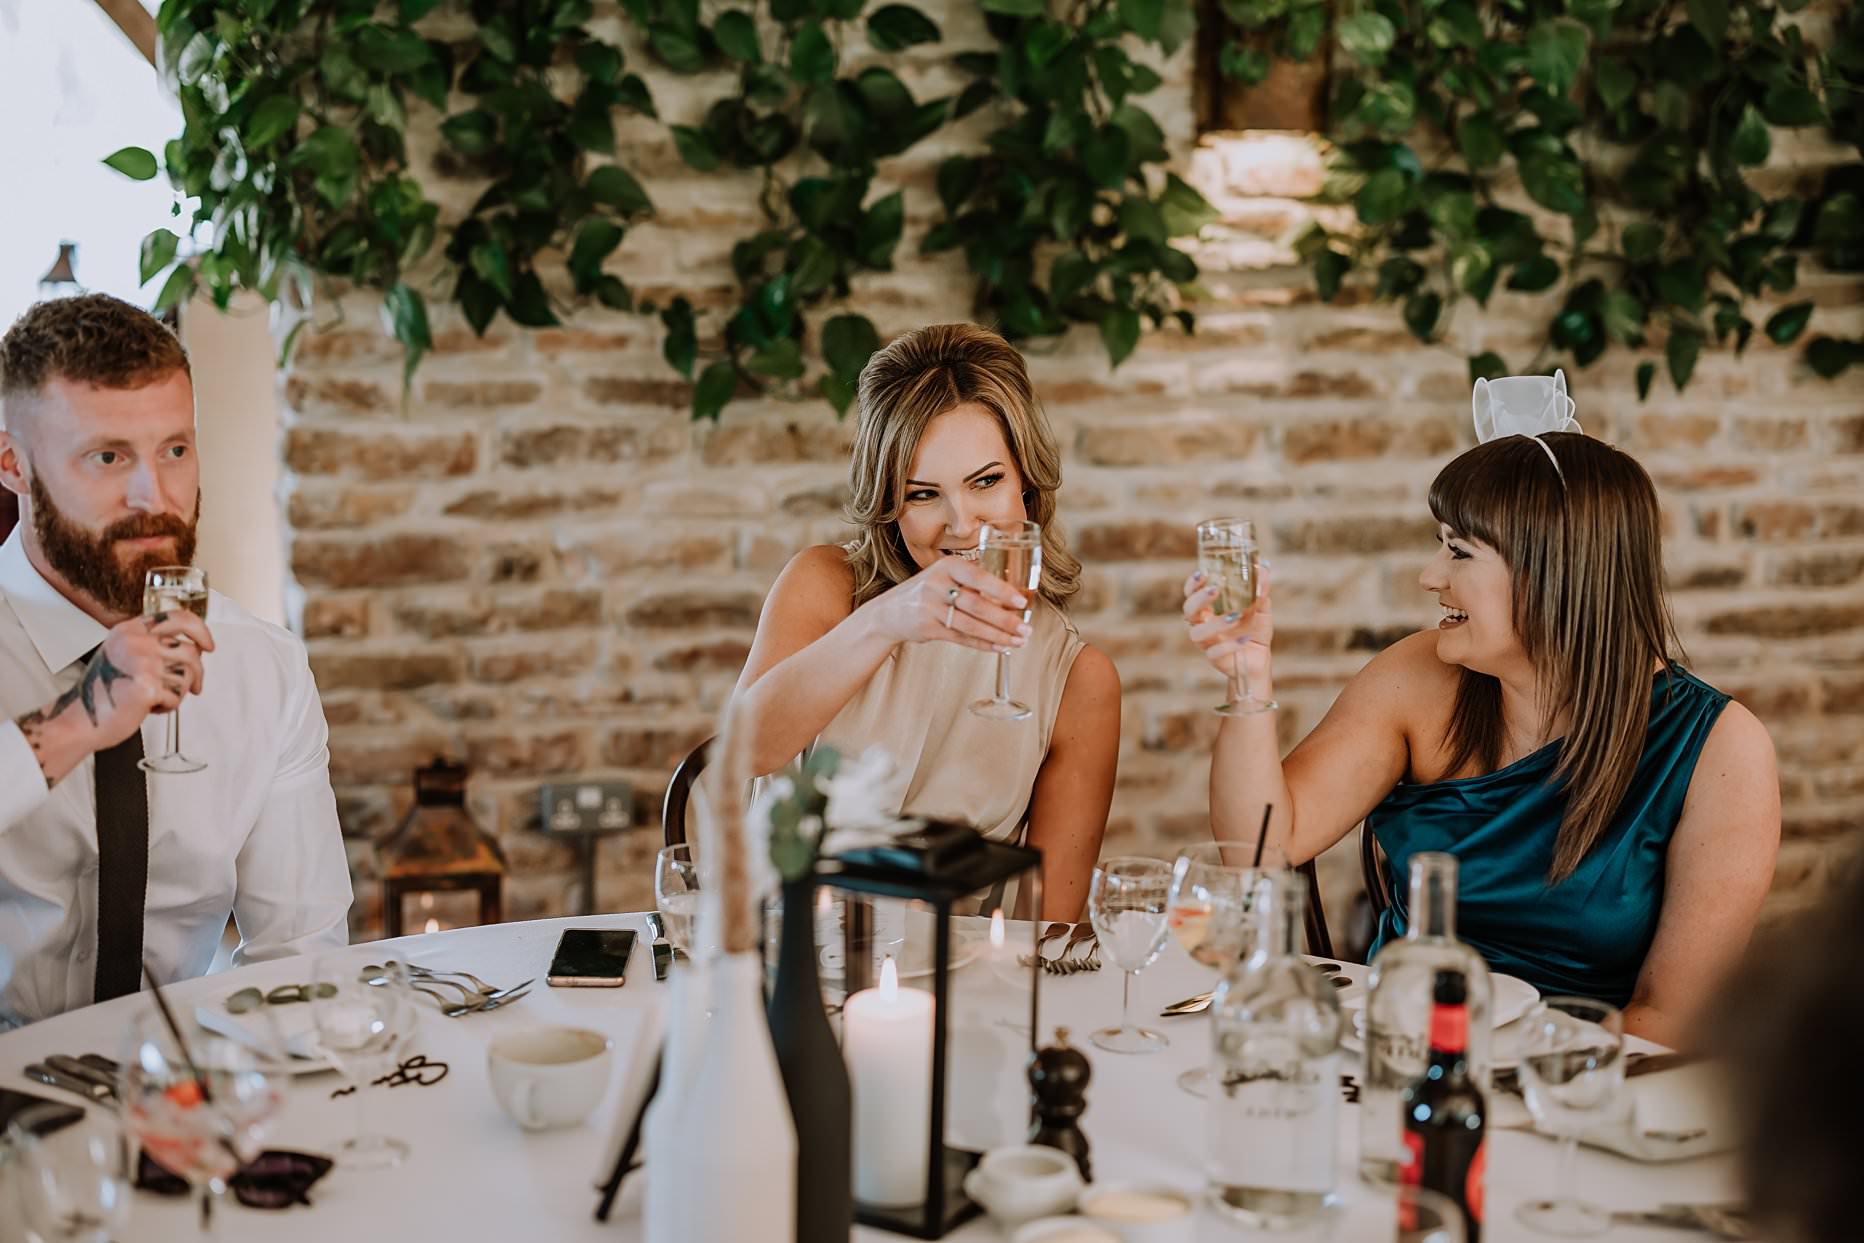 Wedding guest sat at table during wedding breakfast. She is raising a glass of prosecco to toast the bride and groom.